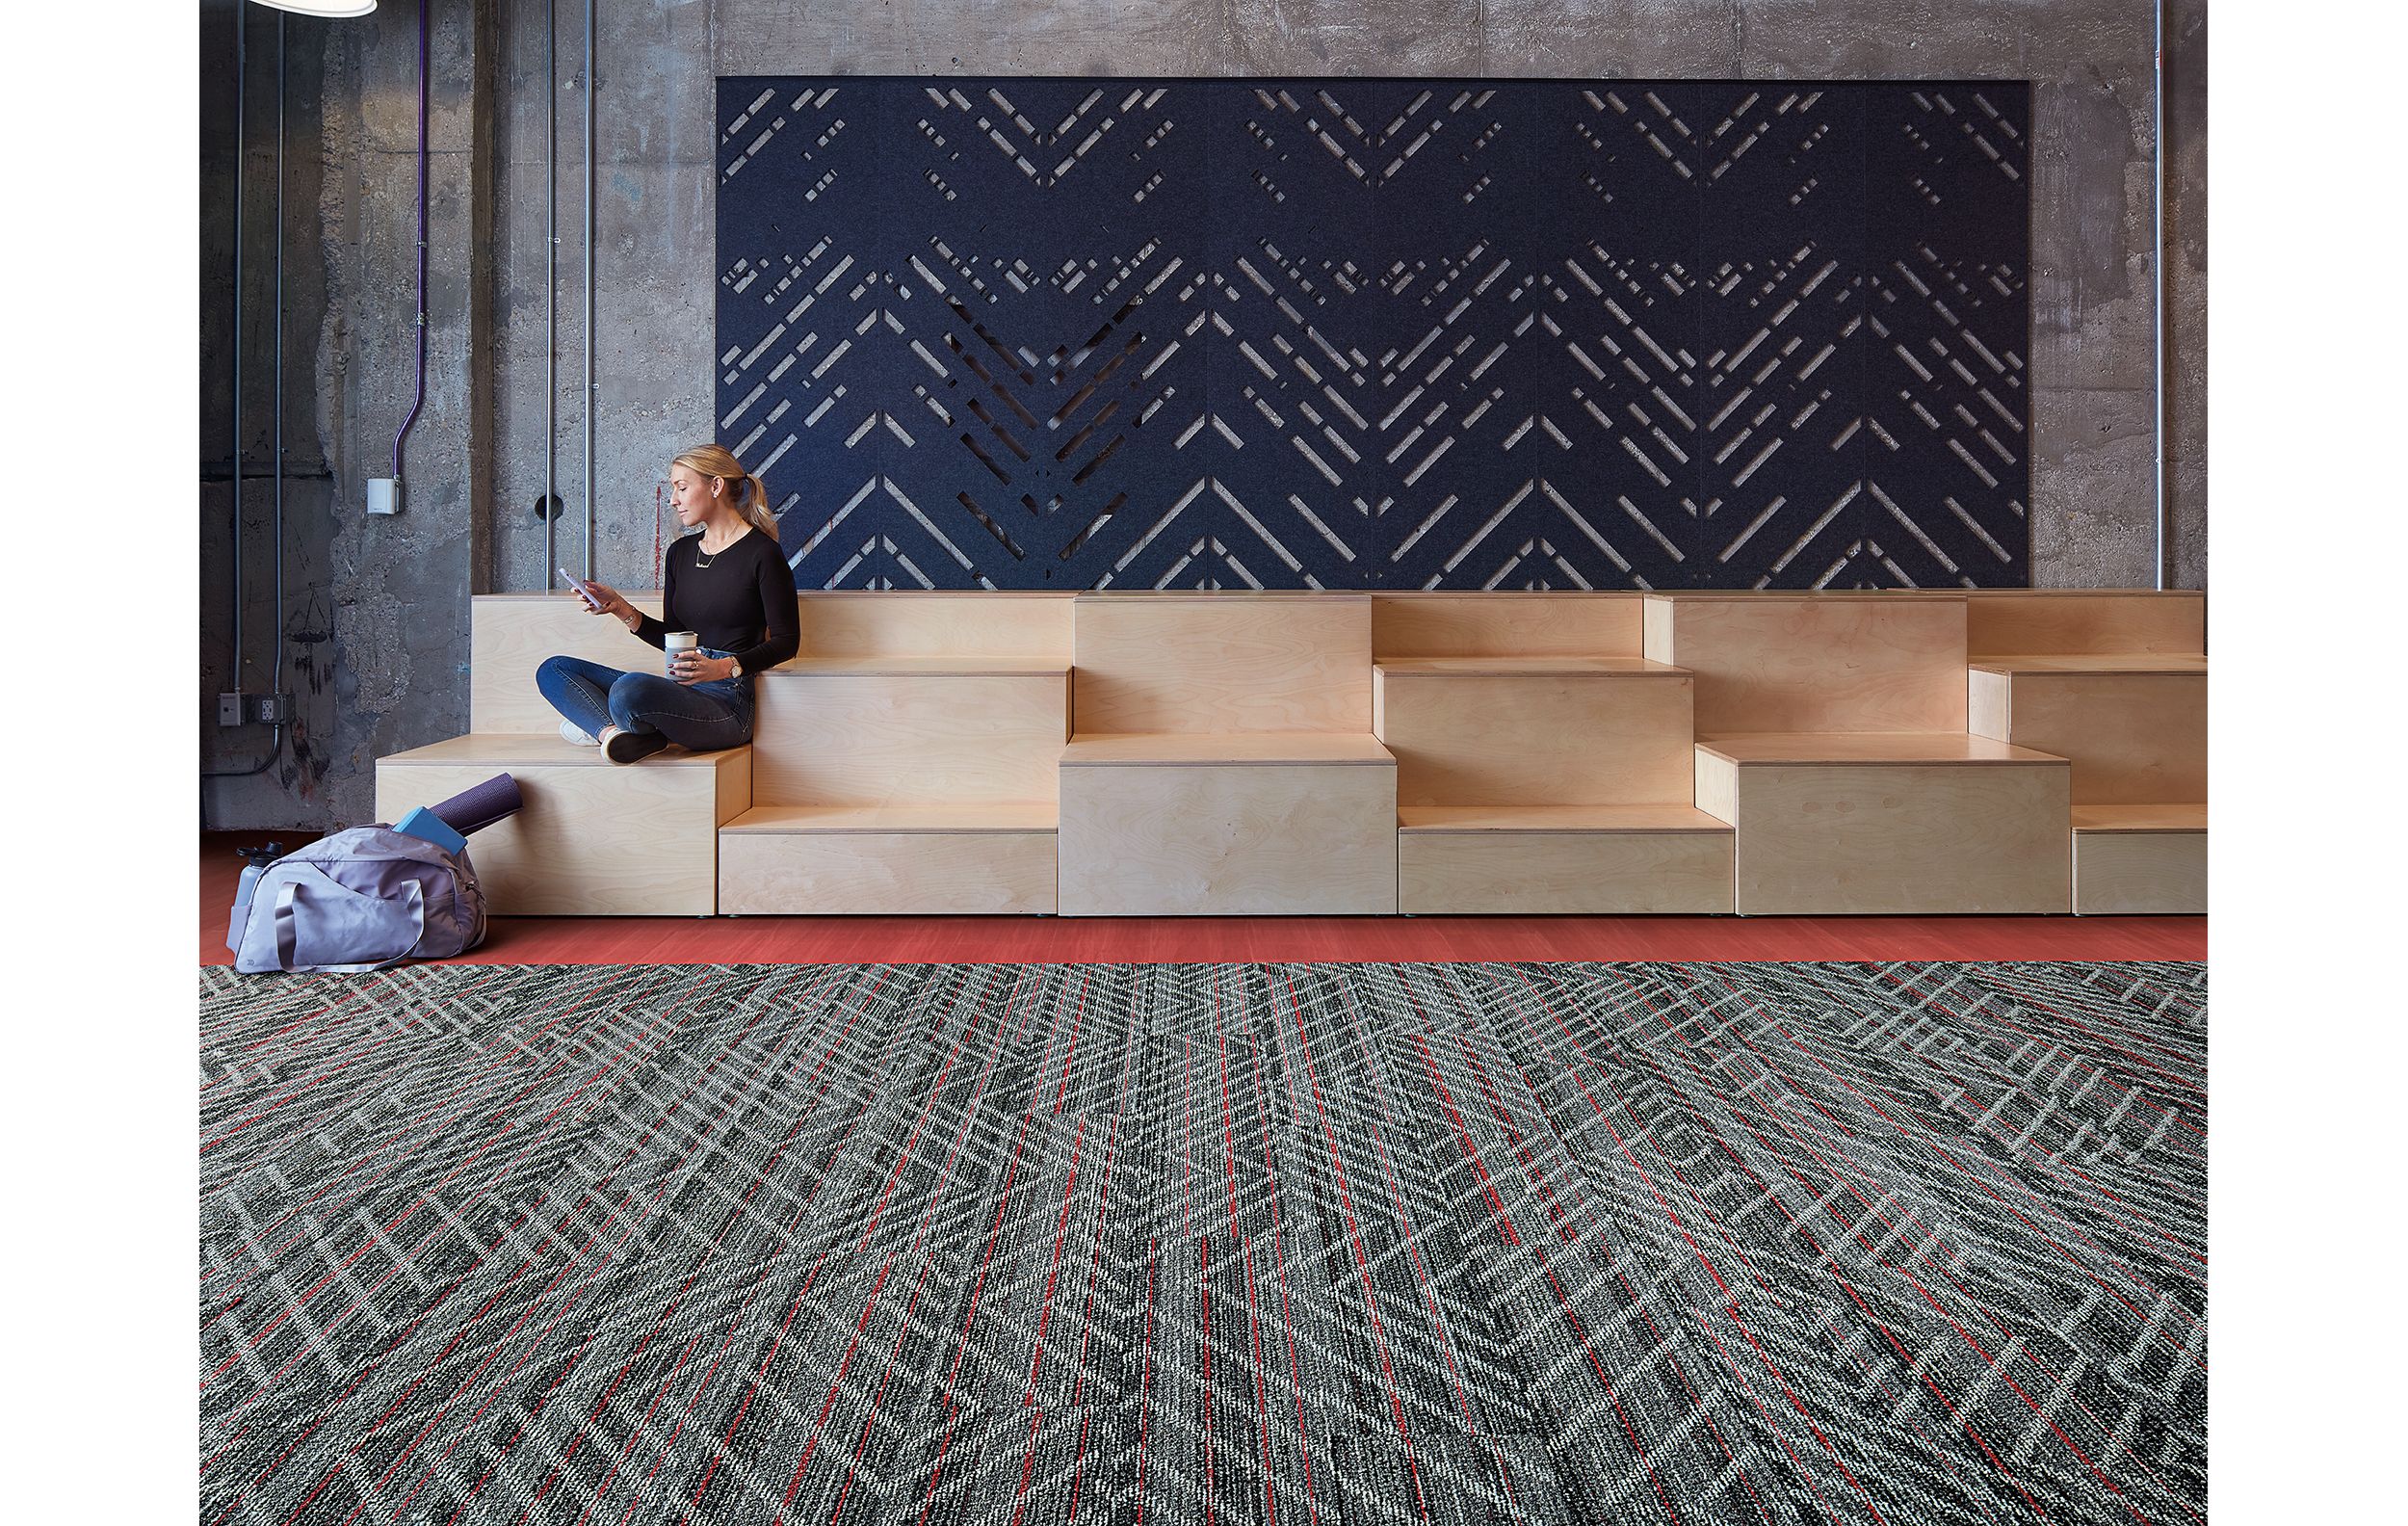 Interface Reflectors plank carpet tile with Studio Set LVT in open area with woman seated on wood risers image number 2